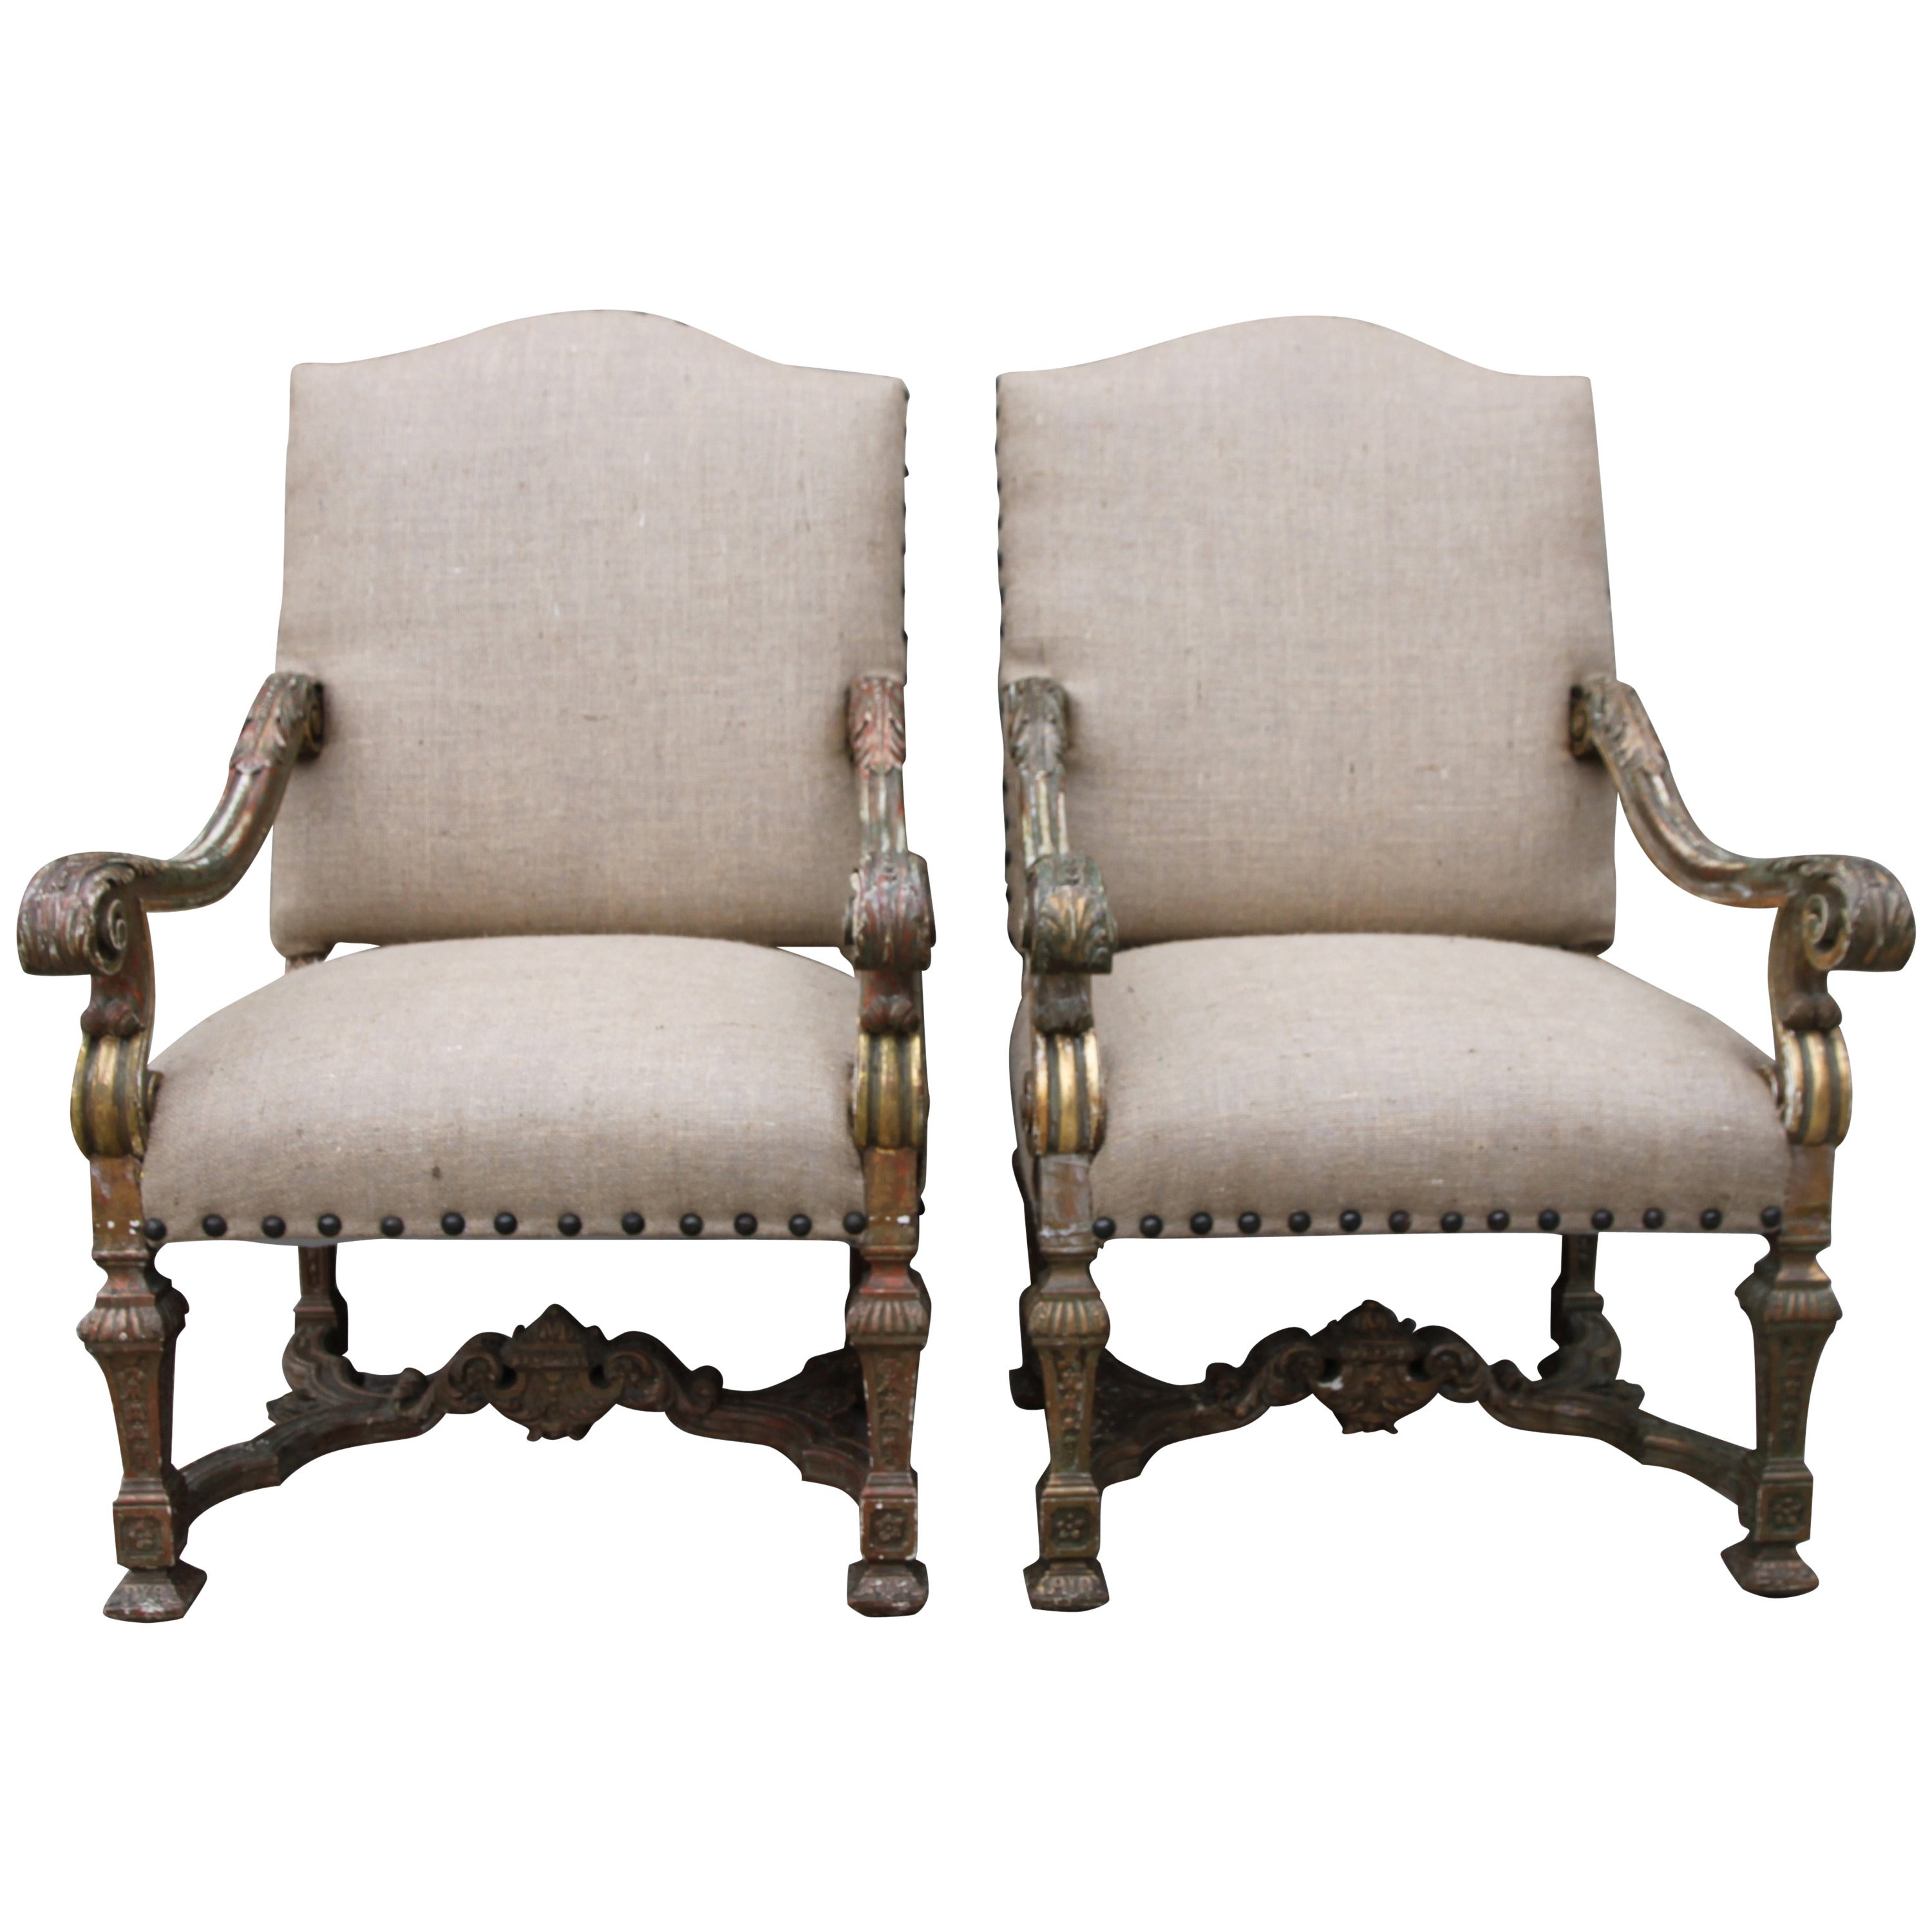 Pair of Italian Painted and Parcel-Gilt Armchairs